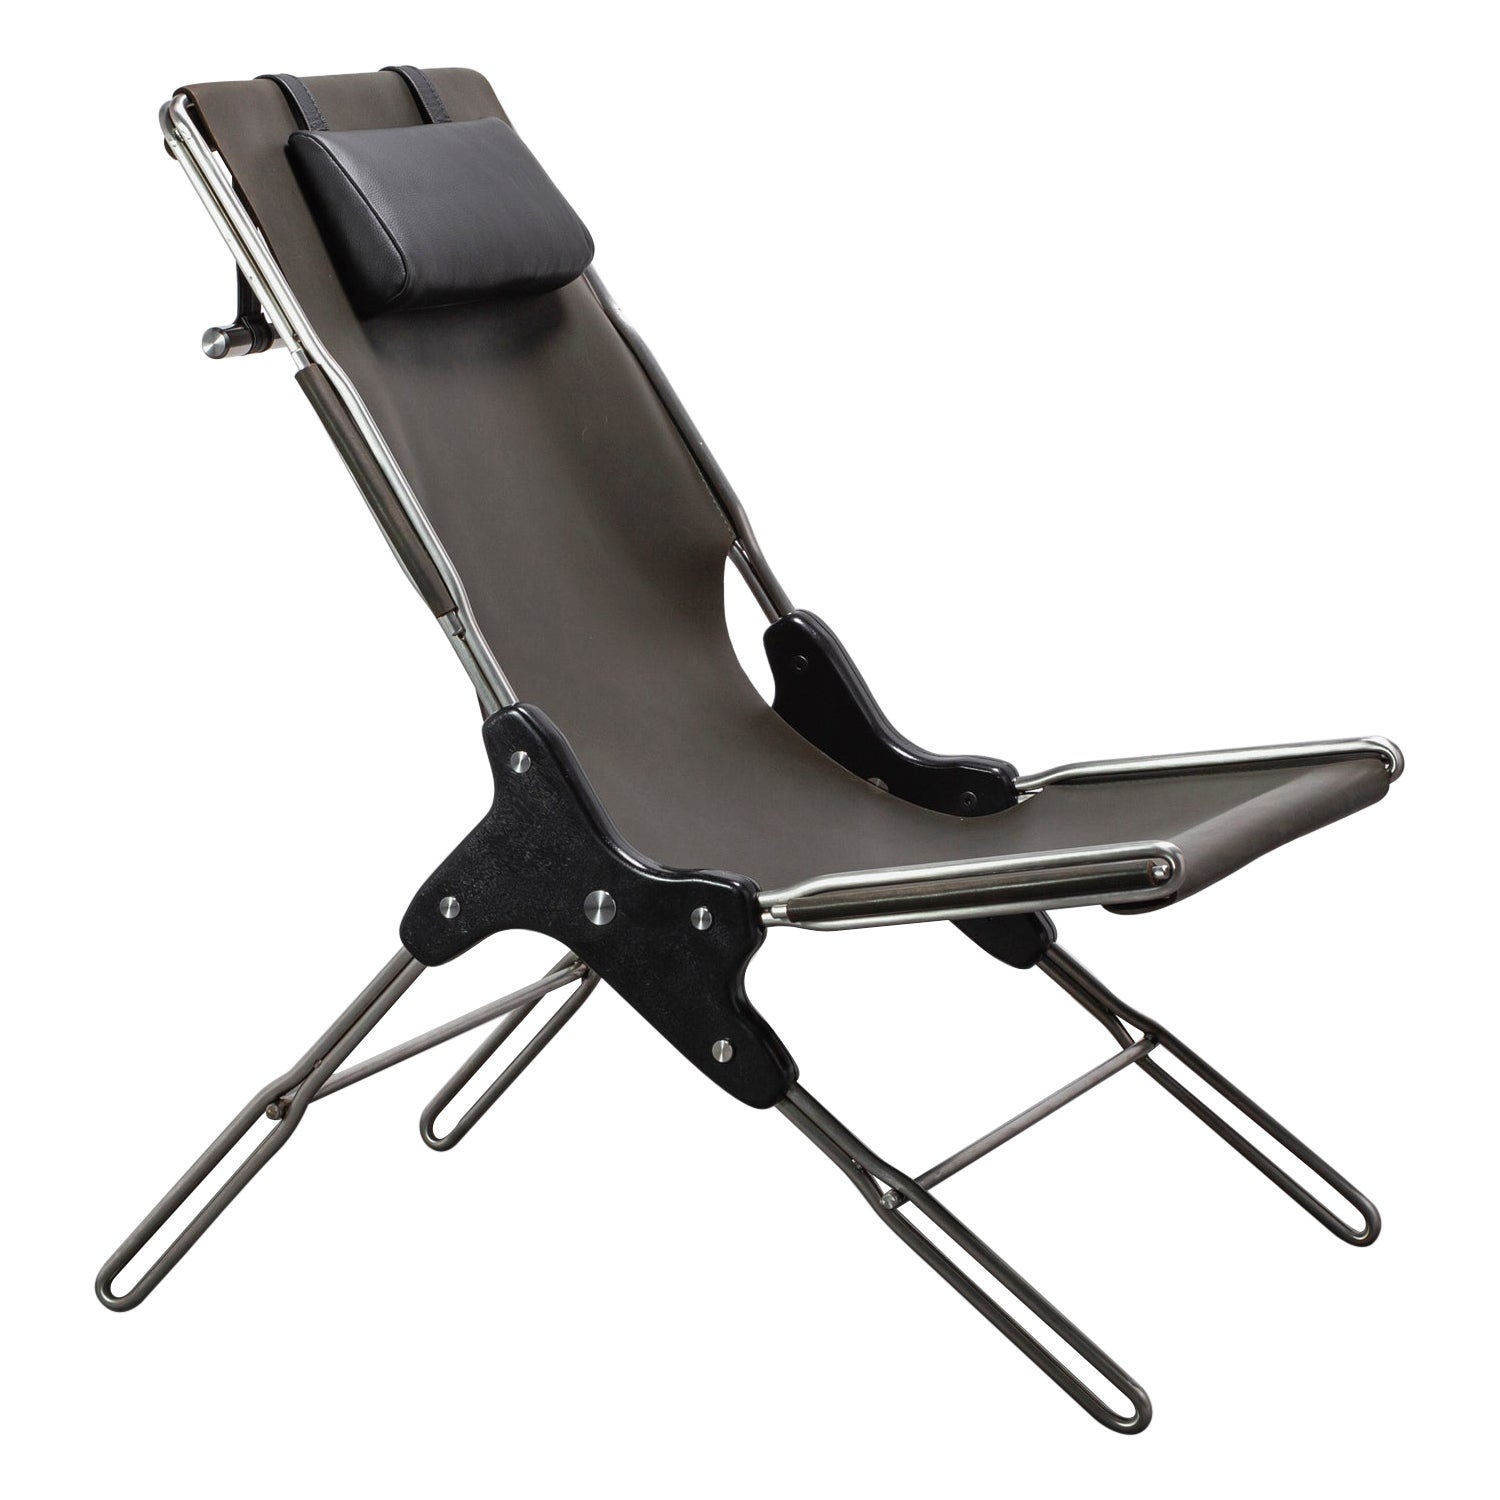 PERFIDIA_01 Olivo Thick Leather Sling Lounge Chair in Stainless Steel by ANDEAN